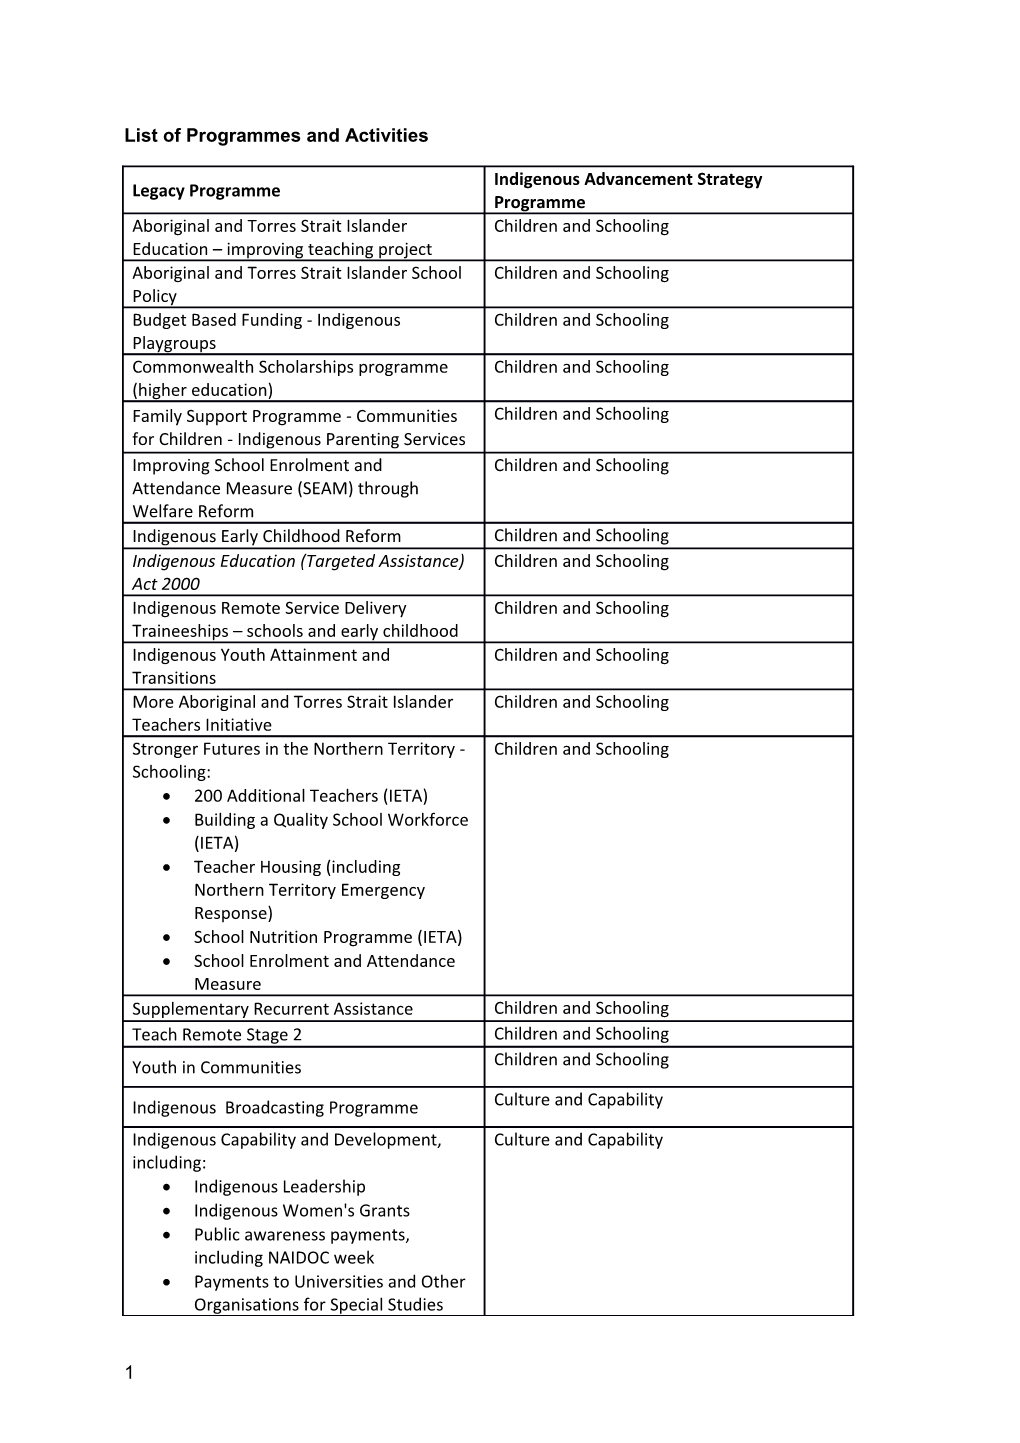 List of Programmes and Activities